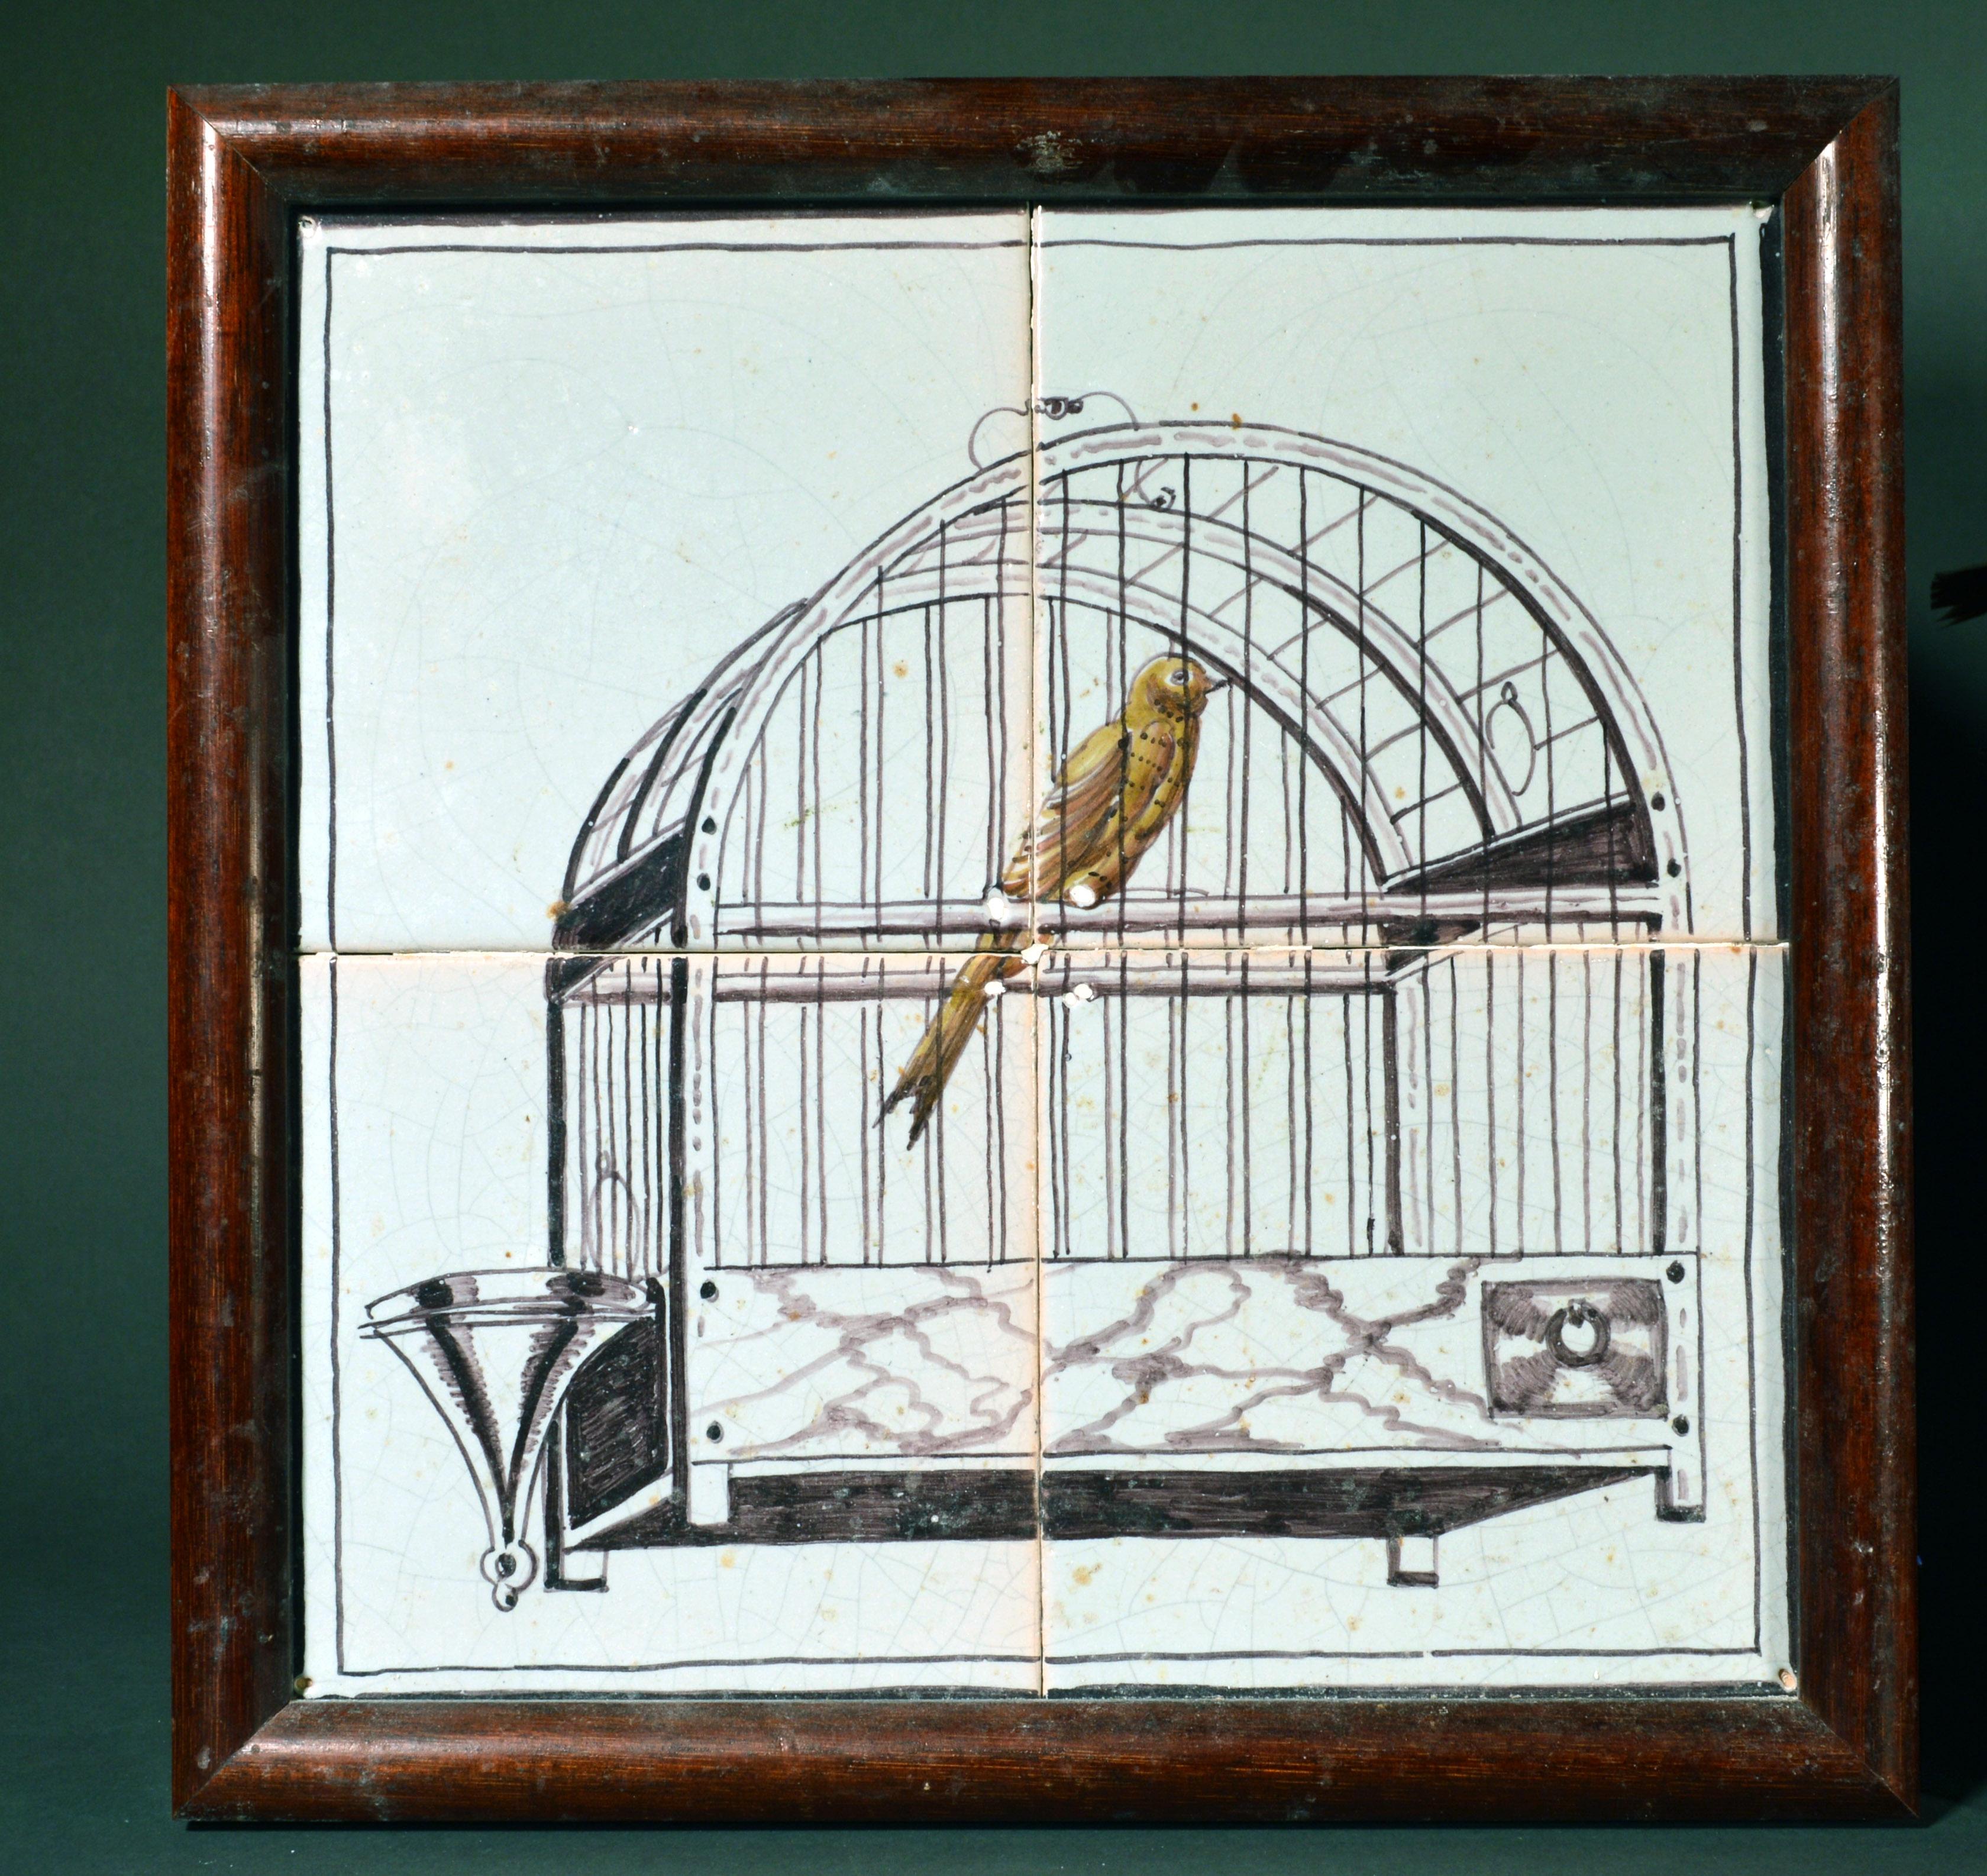 Dutch delft pair of framed tiles with birds in birdcages,
19th century

A pair of framed tile pictures or plaques each consisting of four large Dutch delft tiles depicting a bird in an openwork cage. The birds face each other.

Dimensions: 11